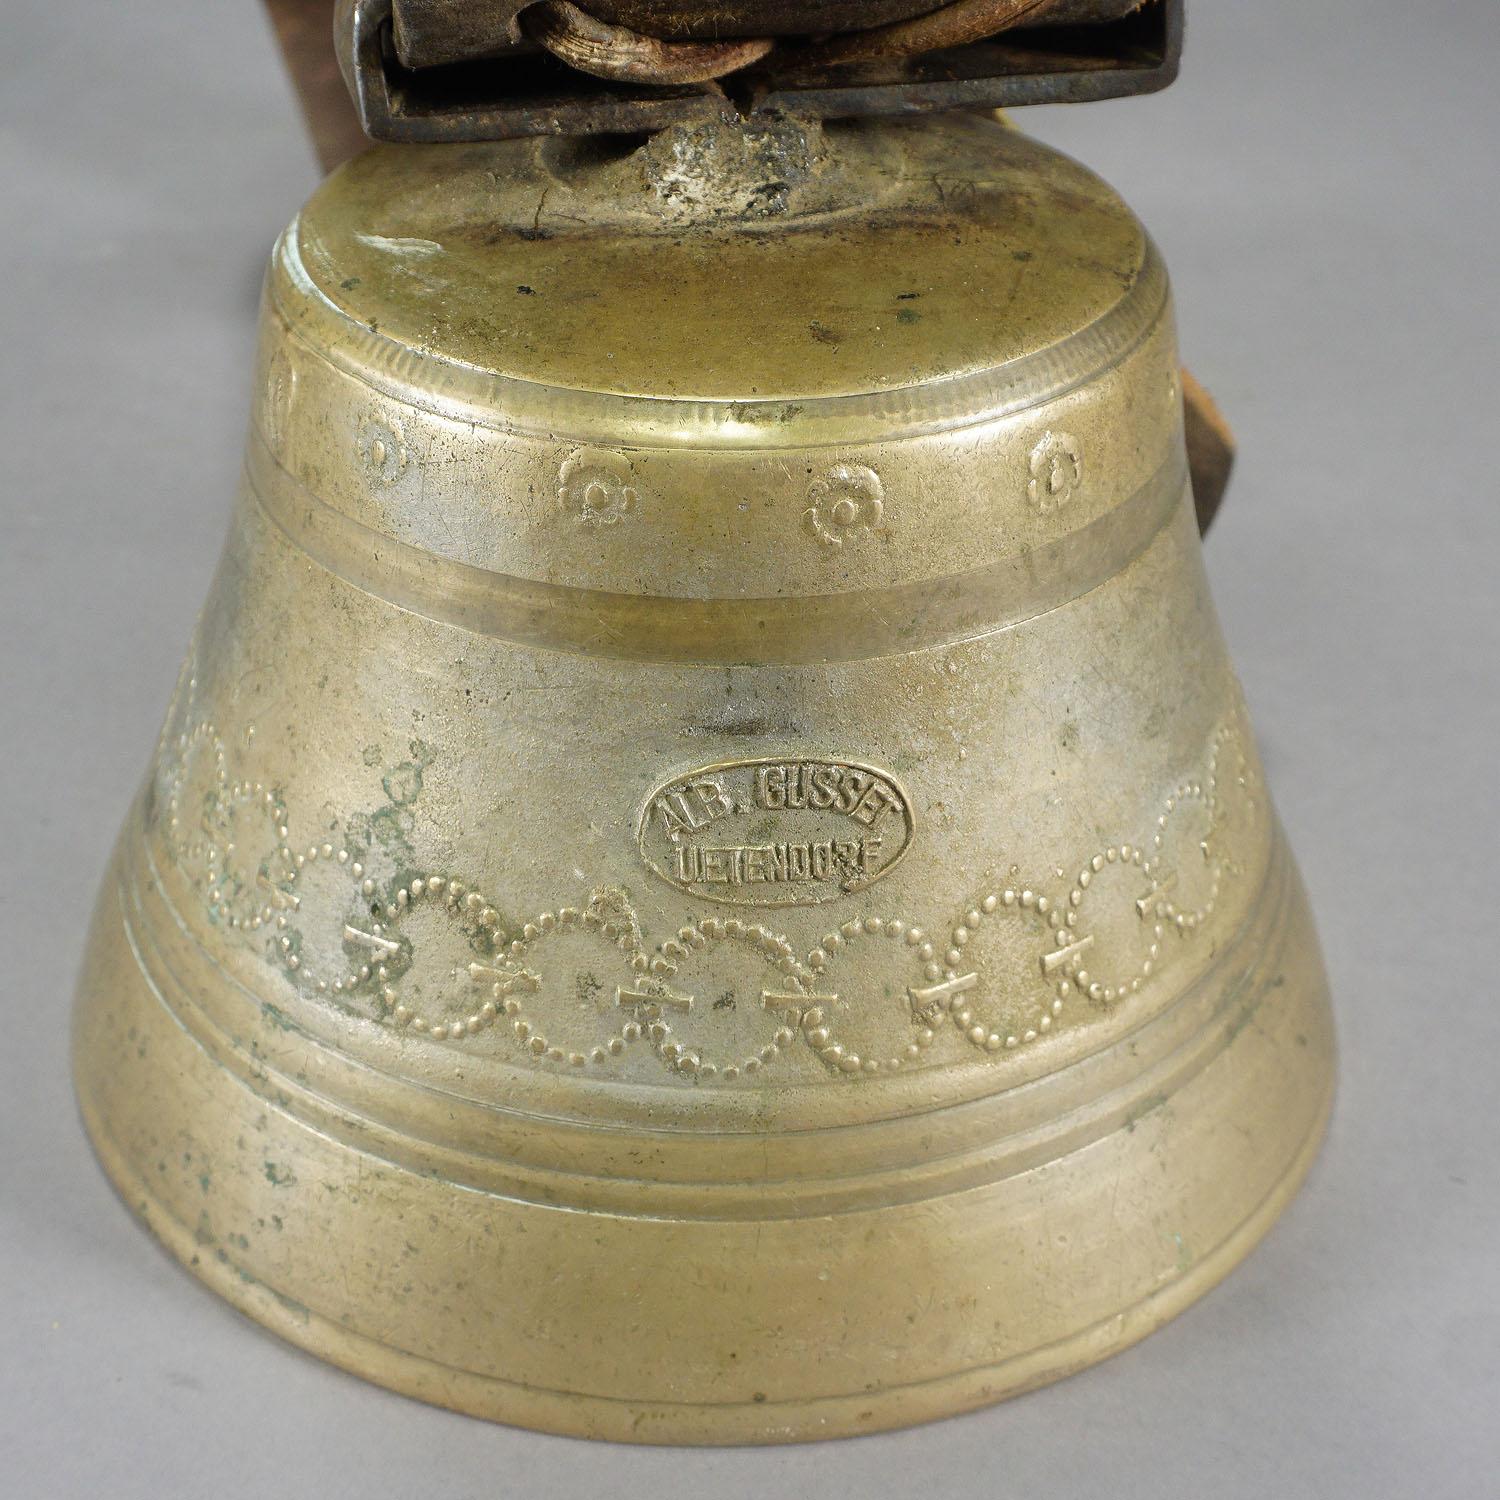 Black Forest Antique Casted Bronze Cow Bell with Leather Strap, Switzerland, ca. 1900